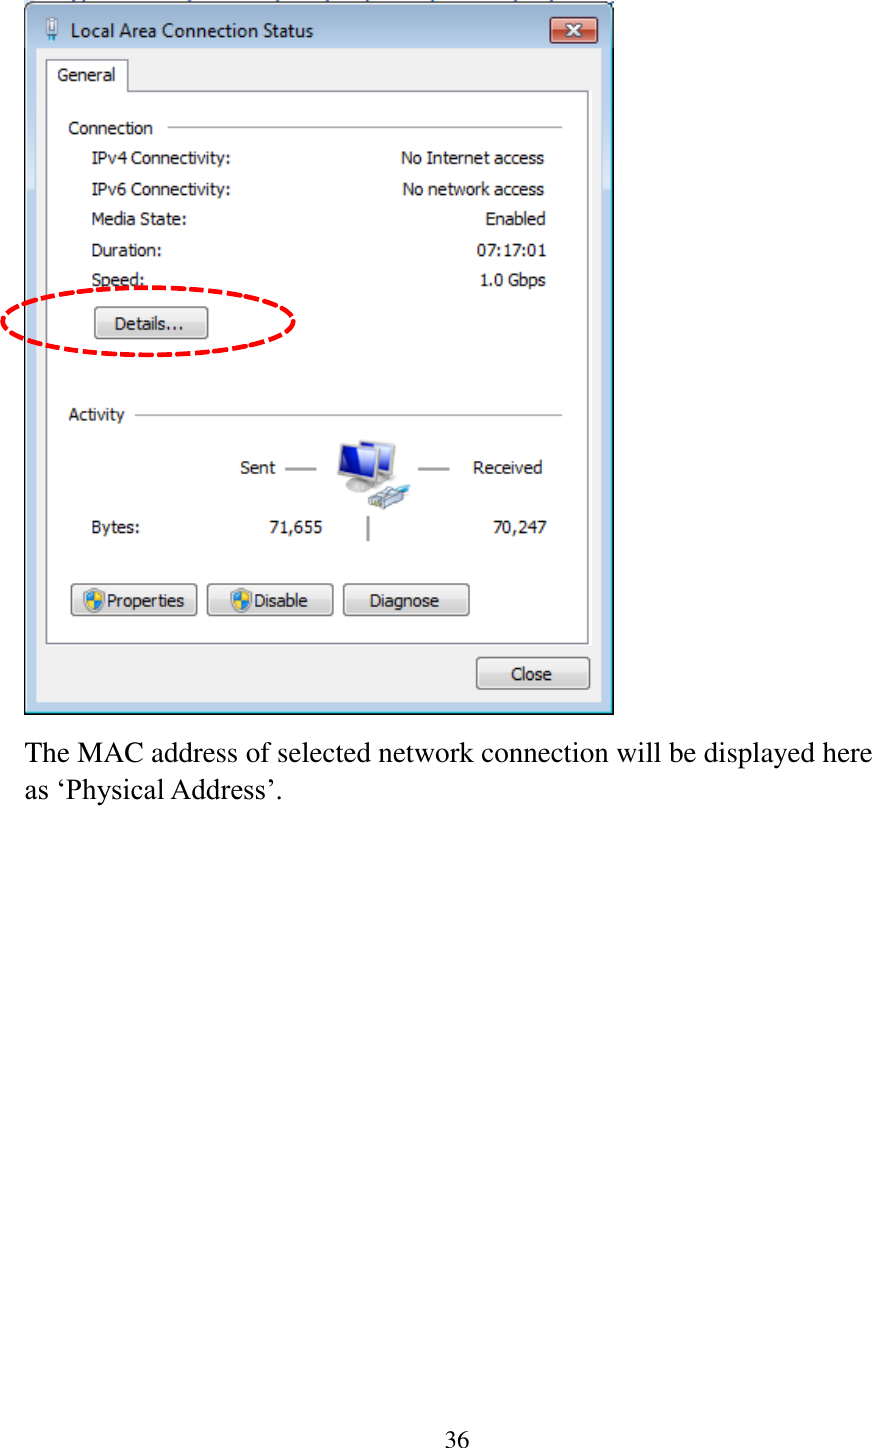 36   The MAC address of selected network connection will be displayed here as „Physical Address‟.  